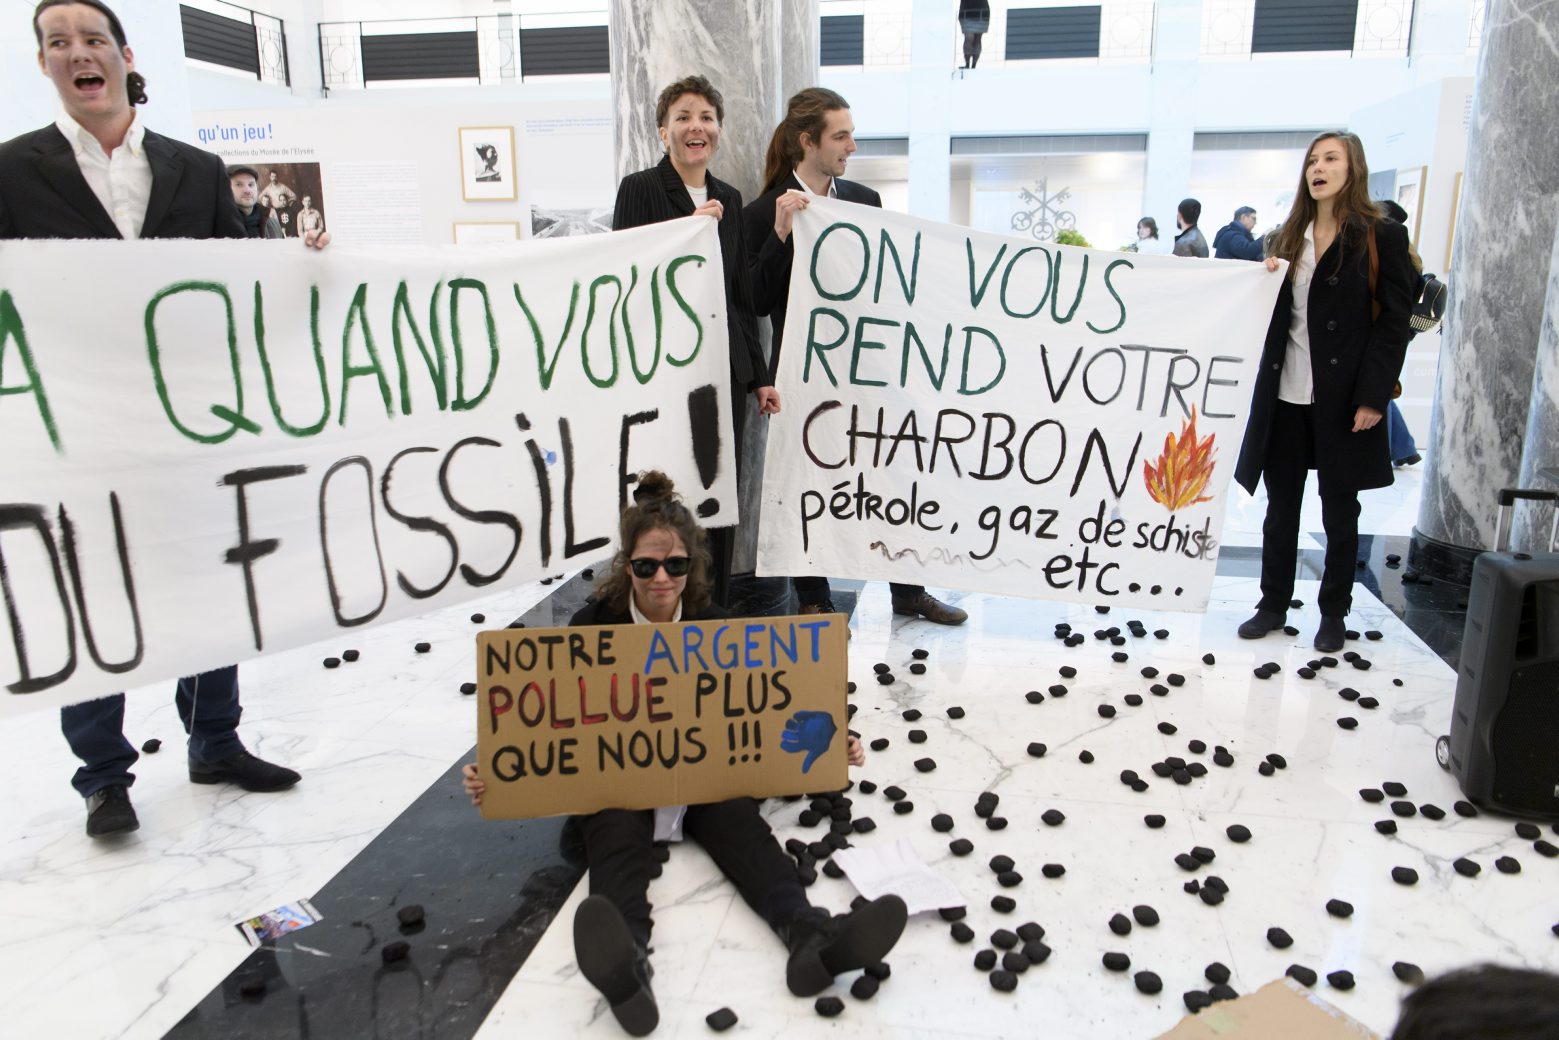 Pro-climate activists of the Climate Strike (Greve du Climat Vaud) collective demonstrate during a environmental protest inside of a branch of Swiss bank UBS, in Lausanne, Switzerland, Tuesday, January 14, 2020. (KEYSTONE/Laurent Gillieron) SWITZERLAND UBS BANK PRO CLIMATE ACTIVISTS